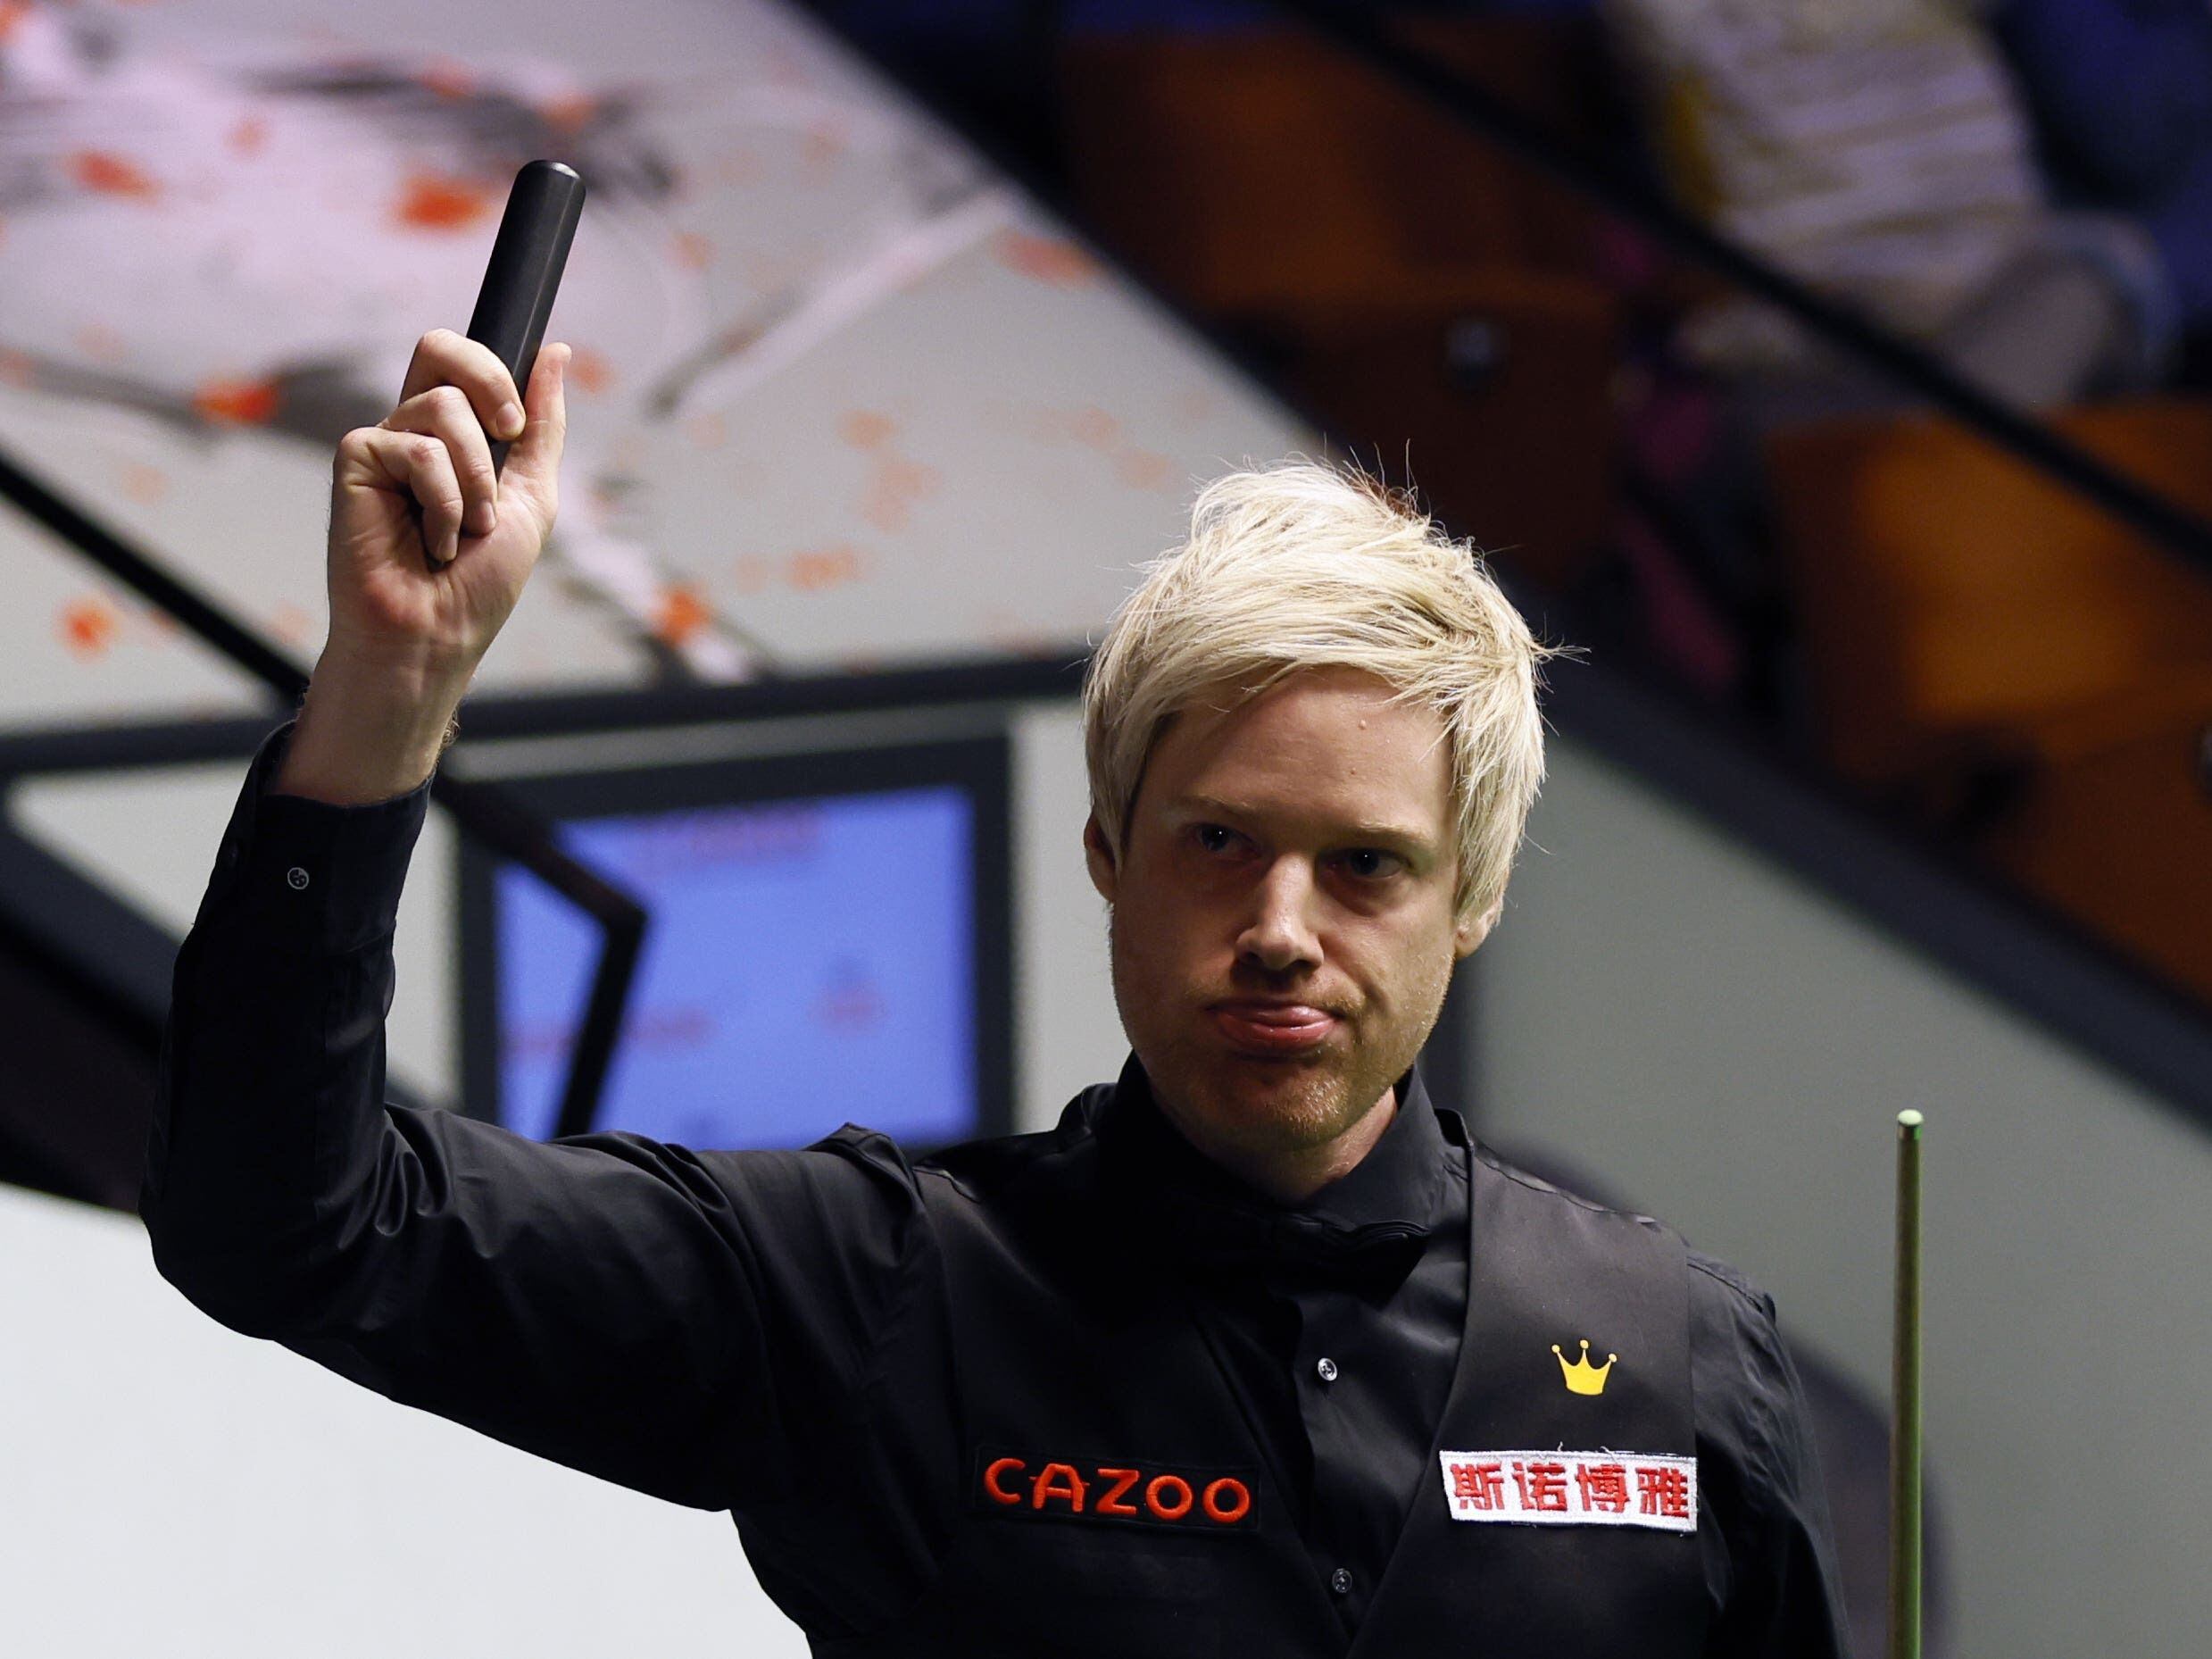 Former champion Neil Robertson reaches round two at Crucible by beating Wu Yize